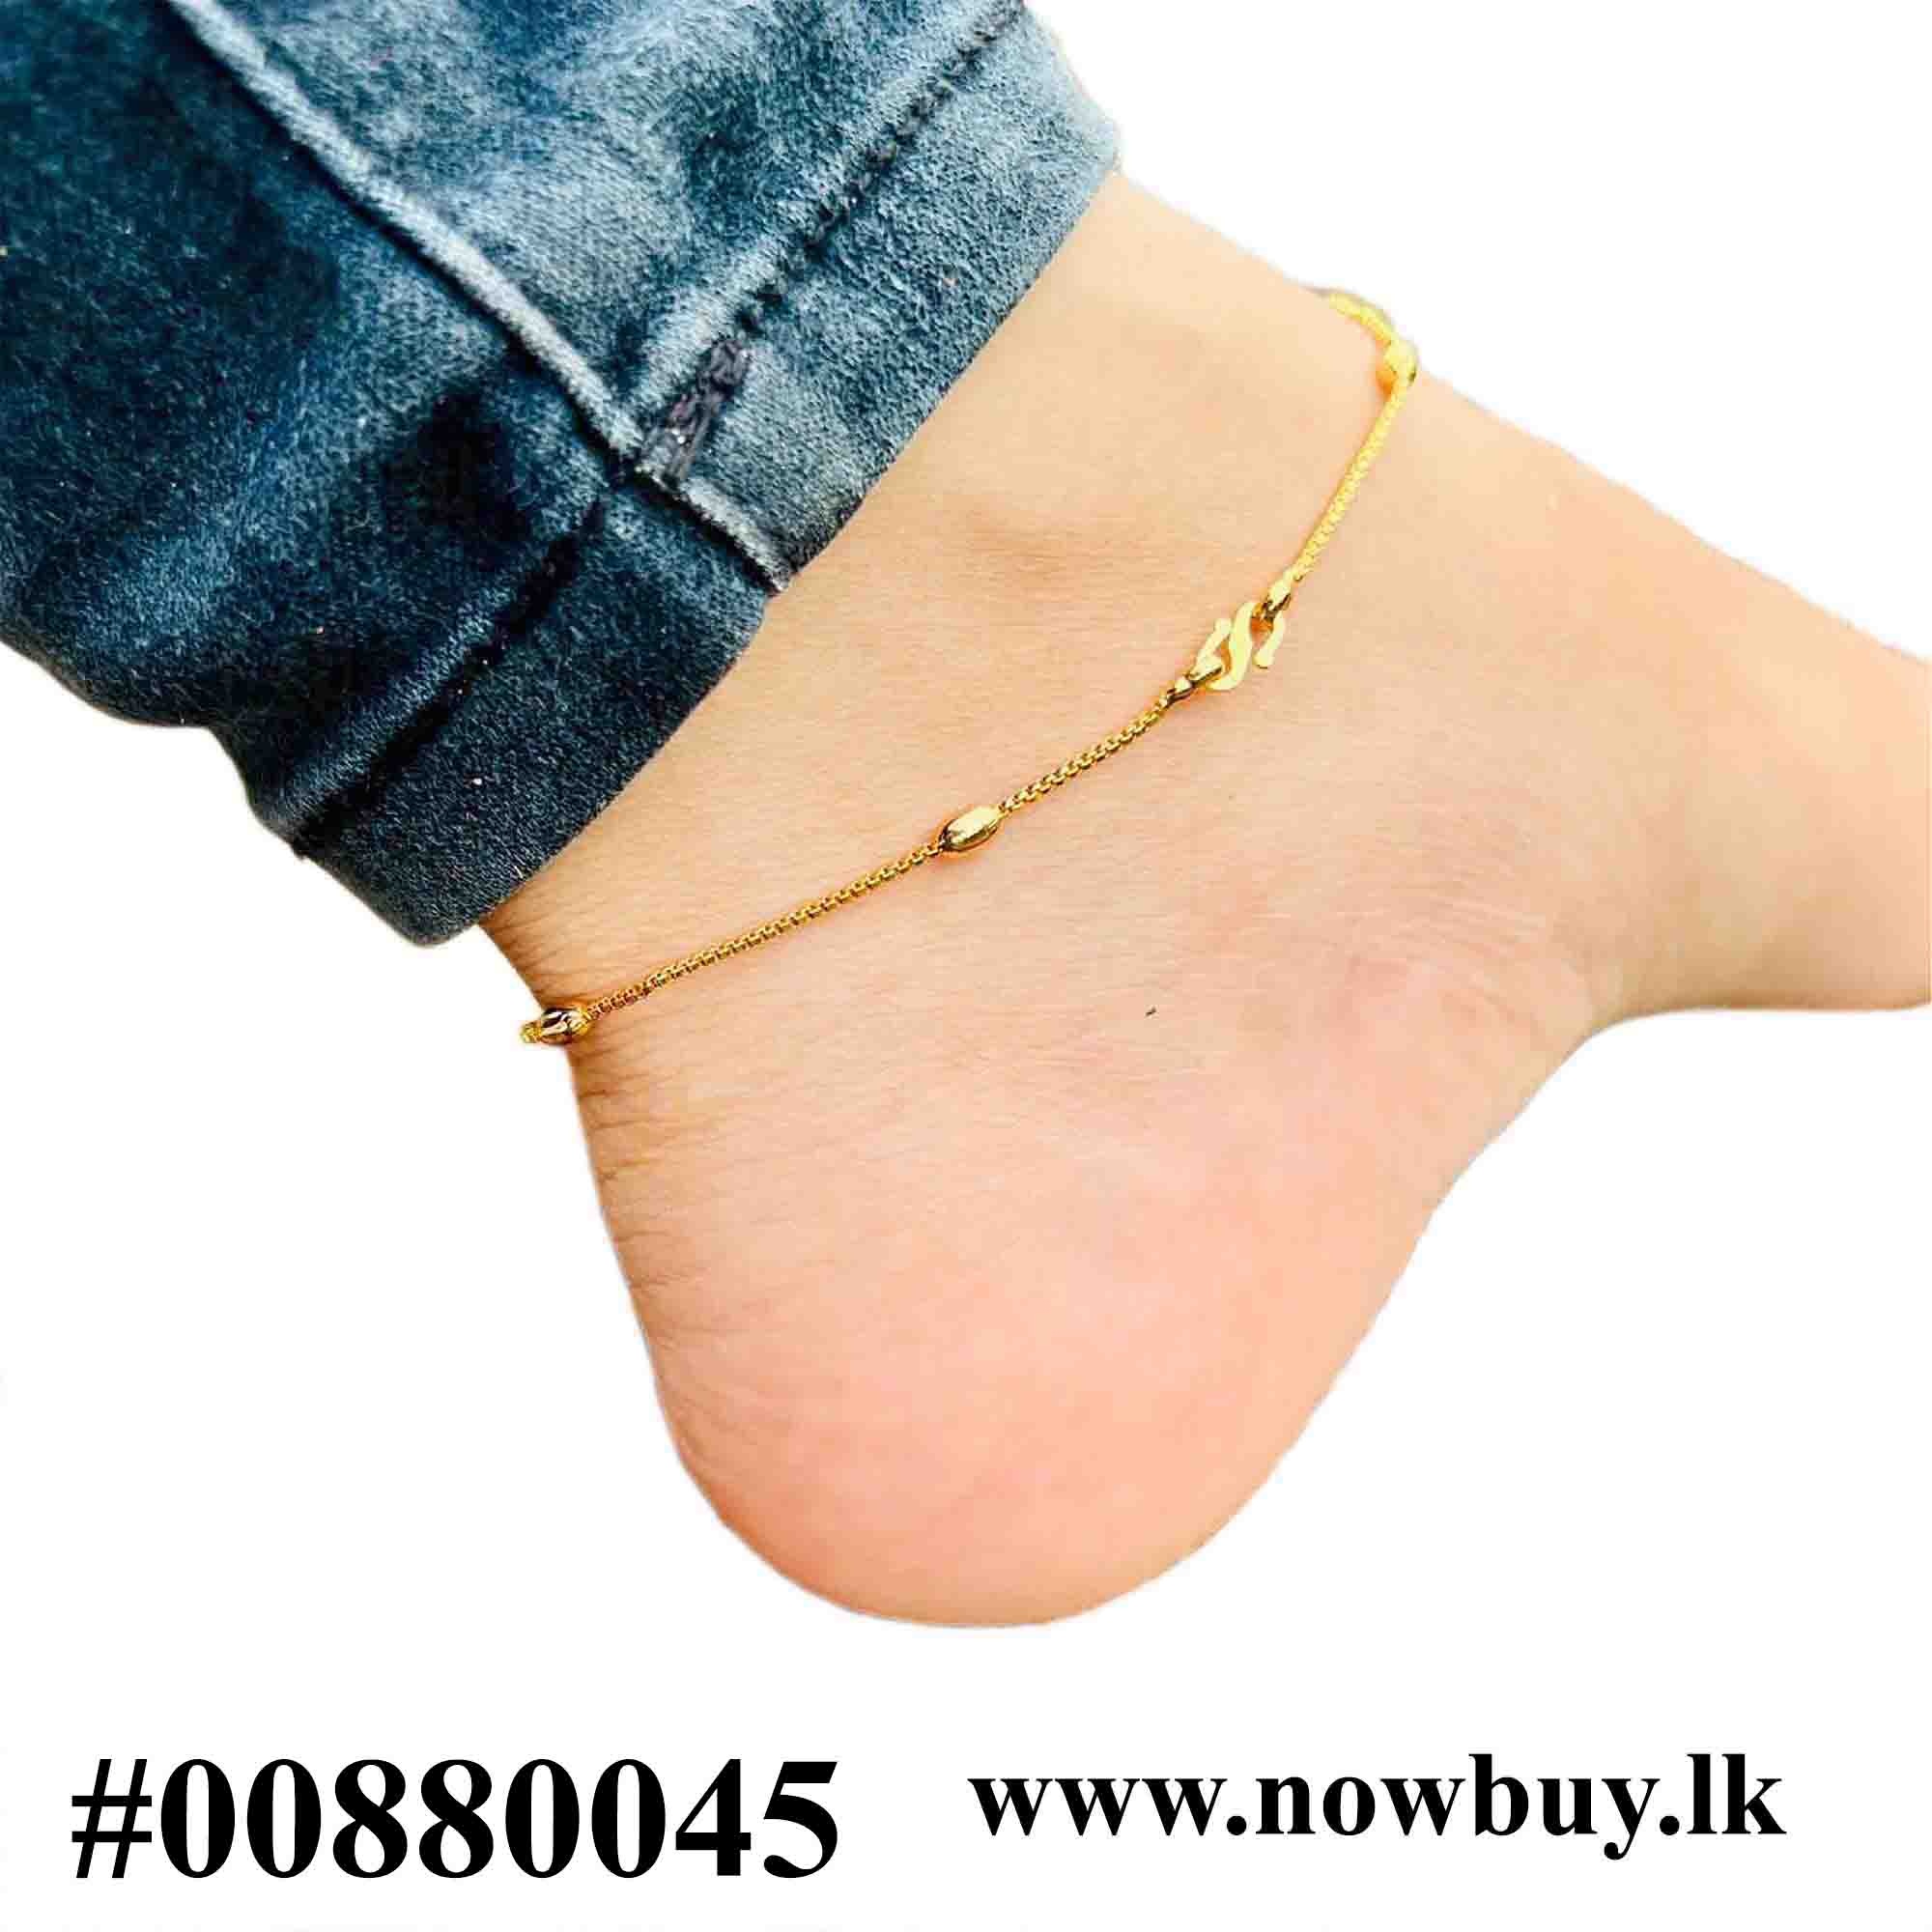 Gold Plated OVAL Type Anklet Box Chain Kolusu Anklets NowBuy.lk 2